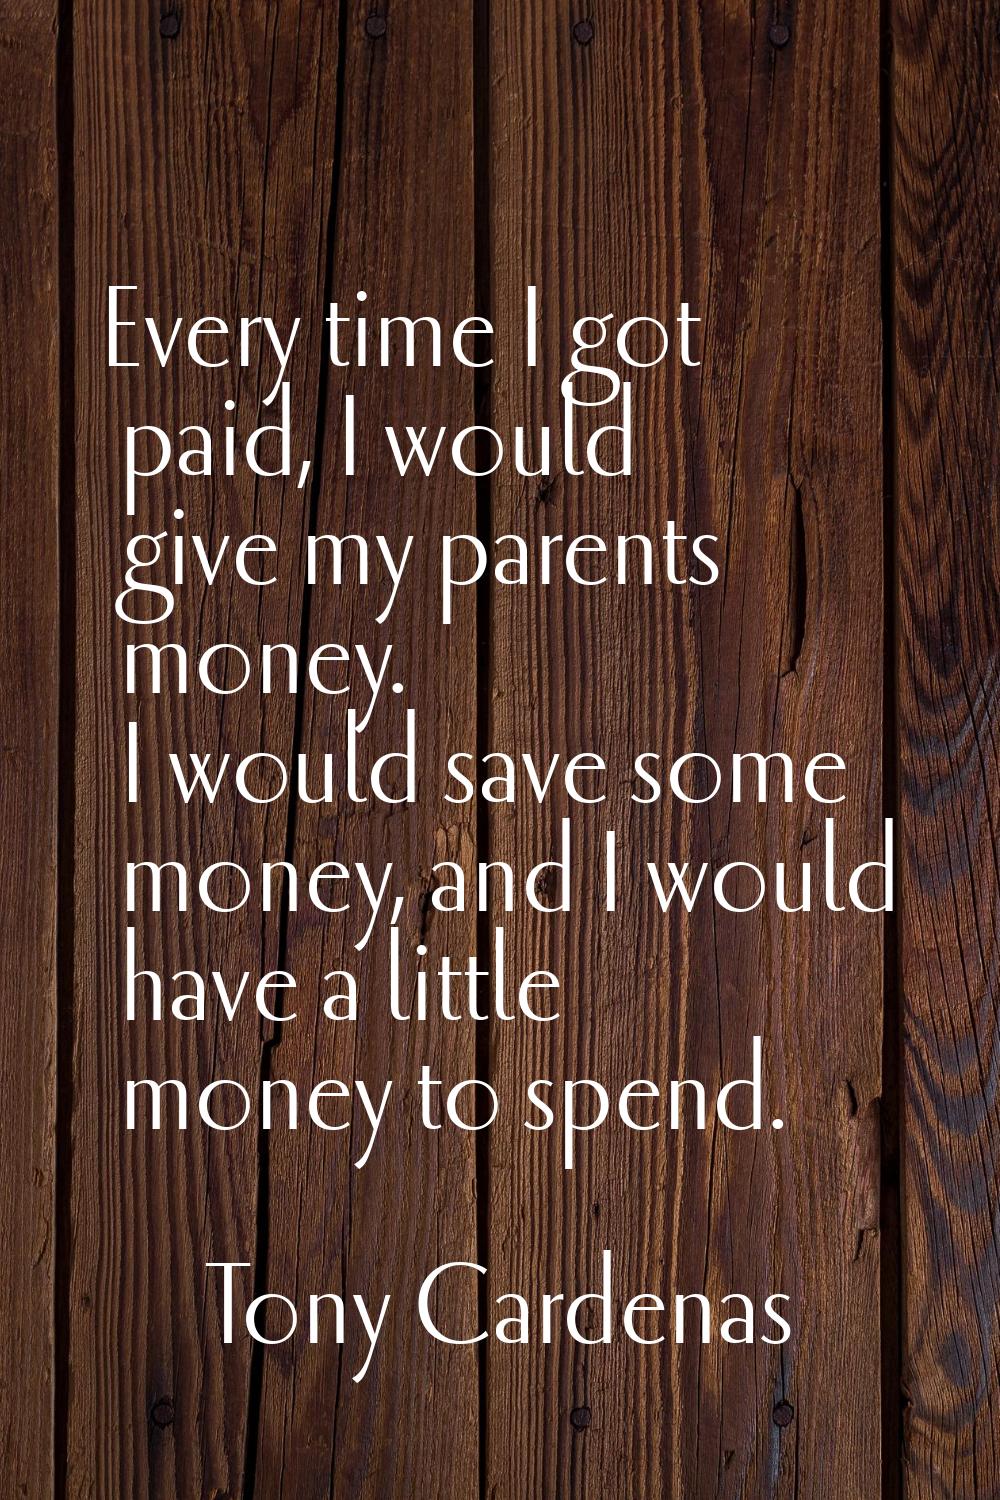 Every time I got paid, I would give my parents money. I would save some money, and I would have a l